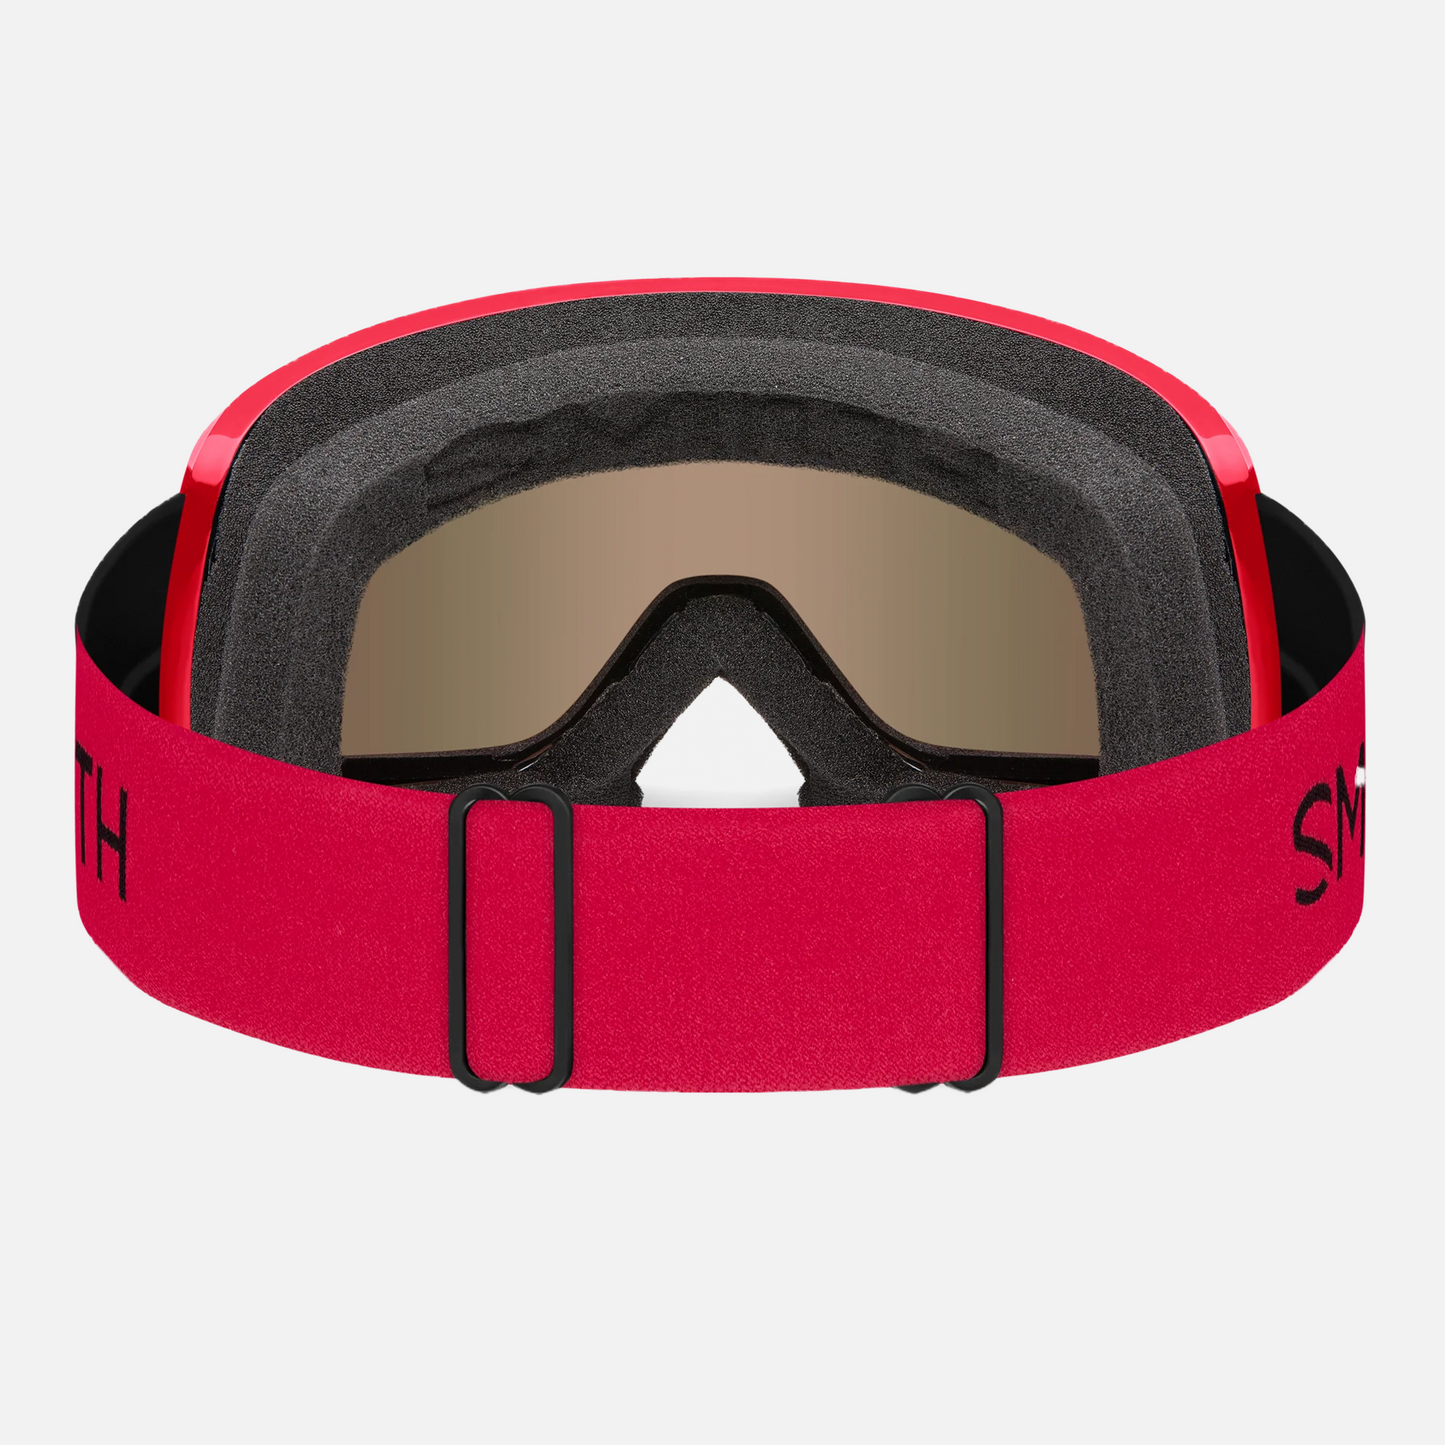 SMITH Frontier Goggle